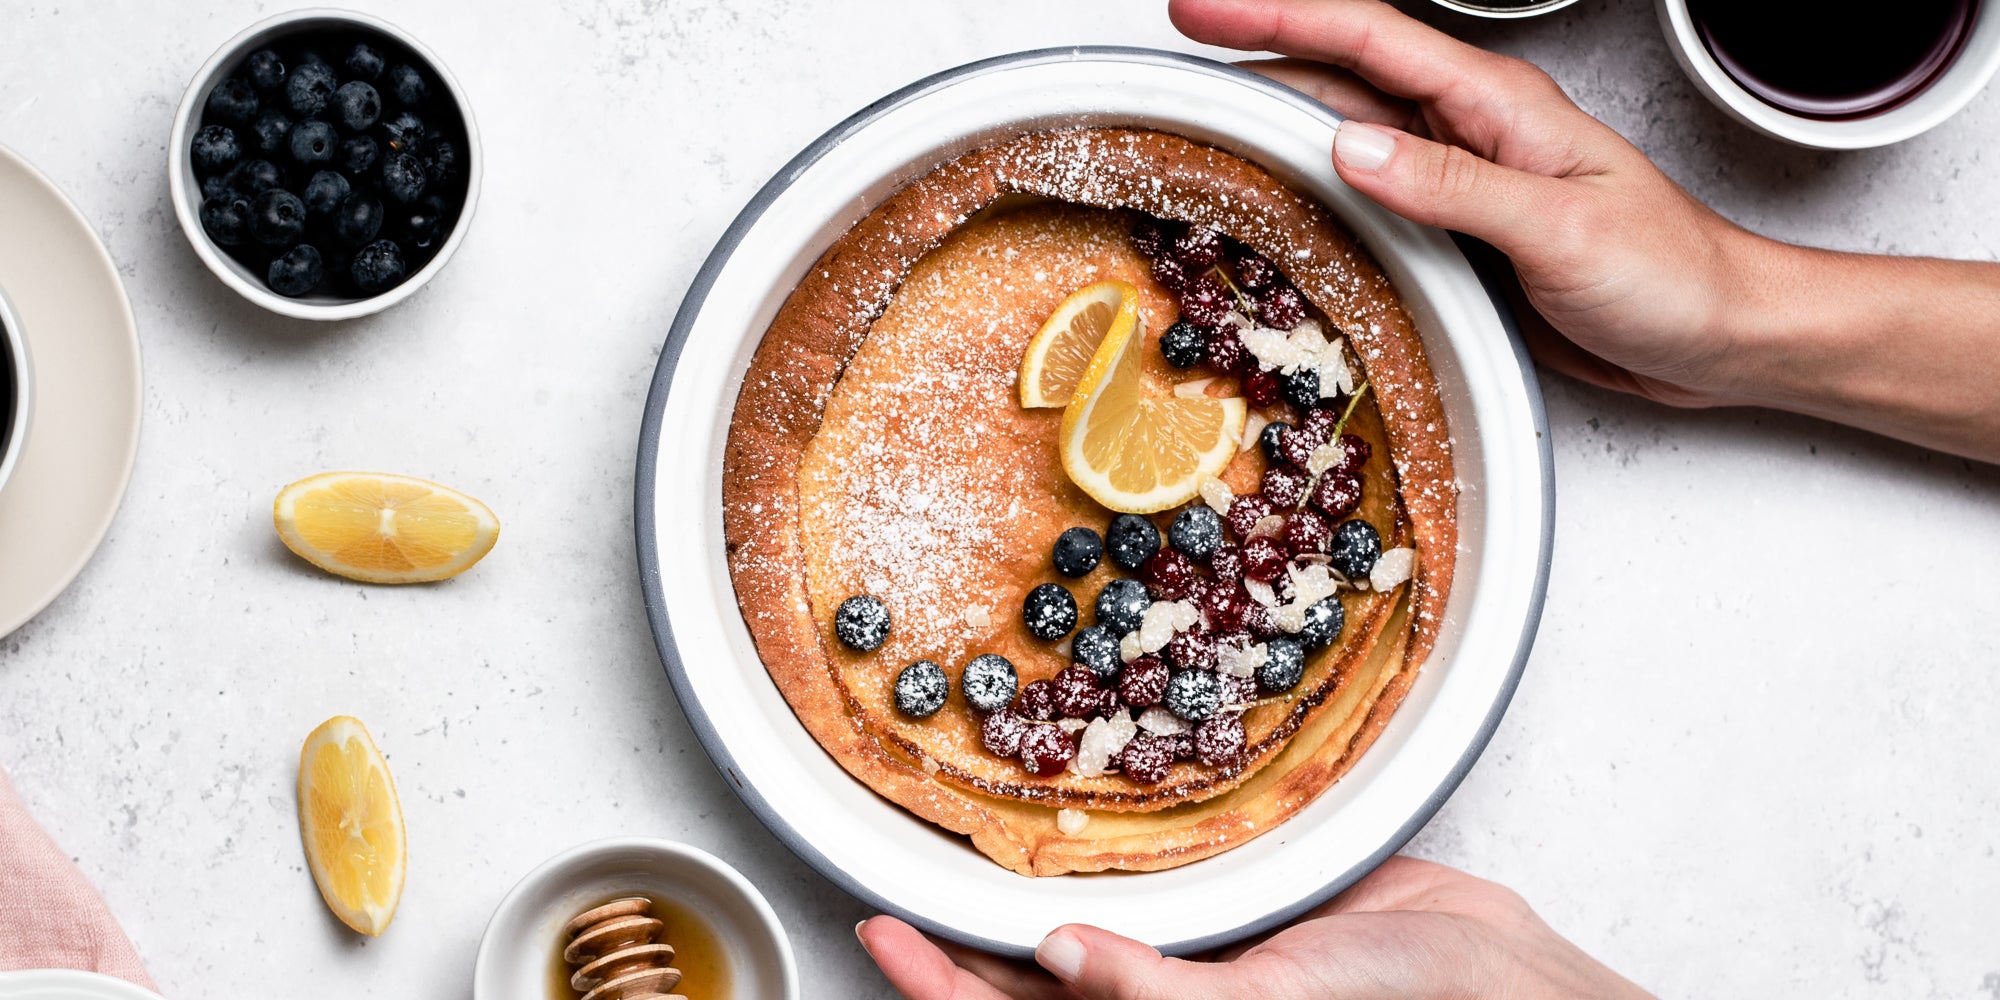 Hands holding plate of Dutch Baby Pancakes drizzled in honey, topped with berries and lemon, next to a cup of coffee, a honey drizzler and ramekin of blueberries